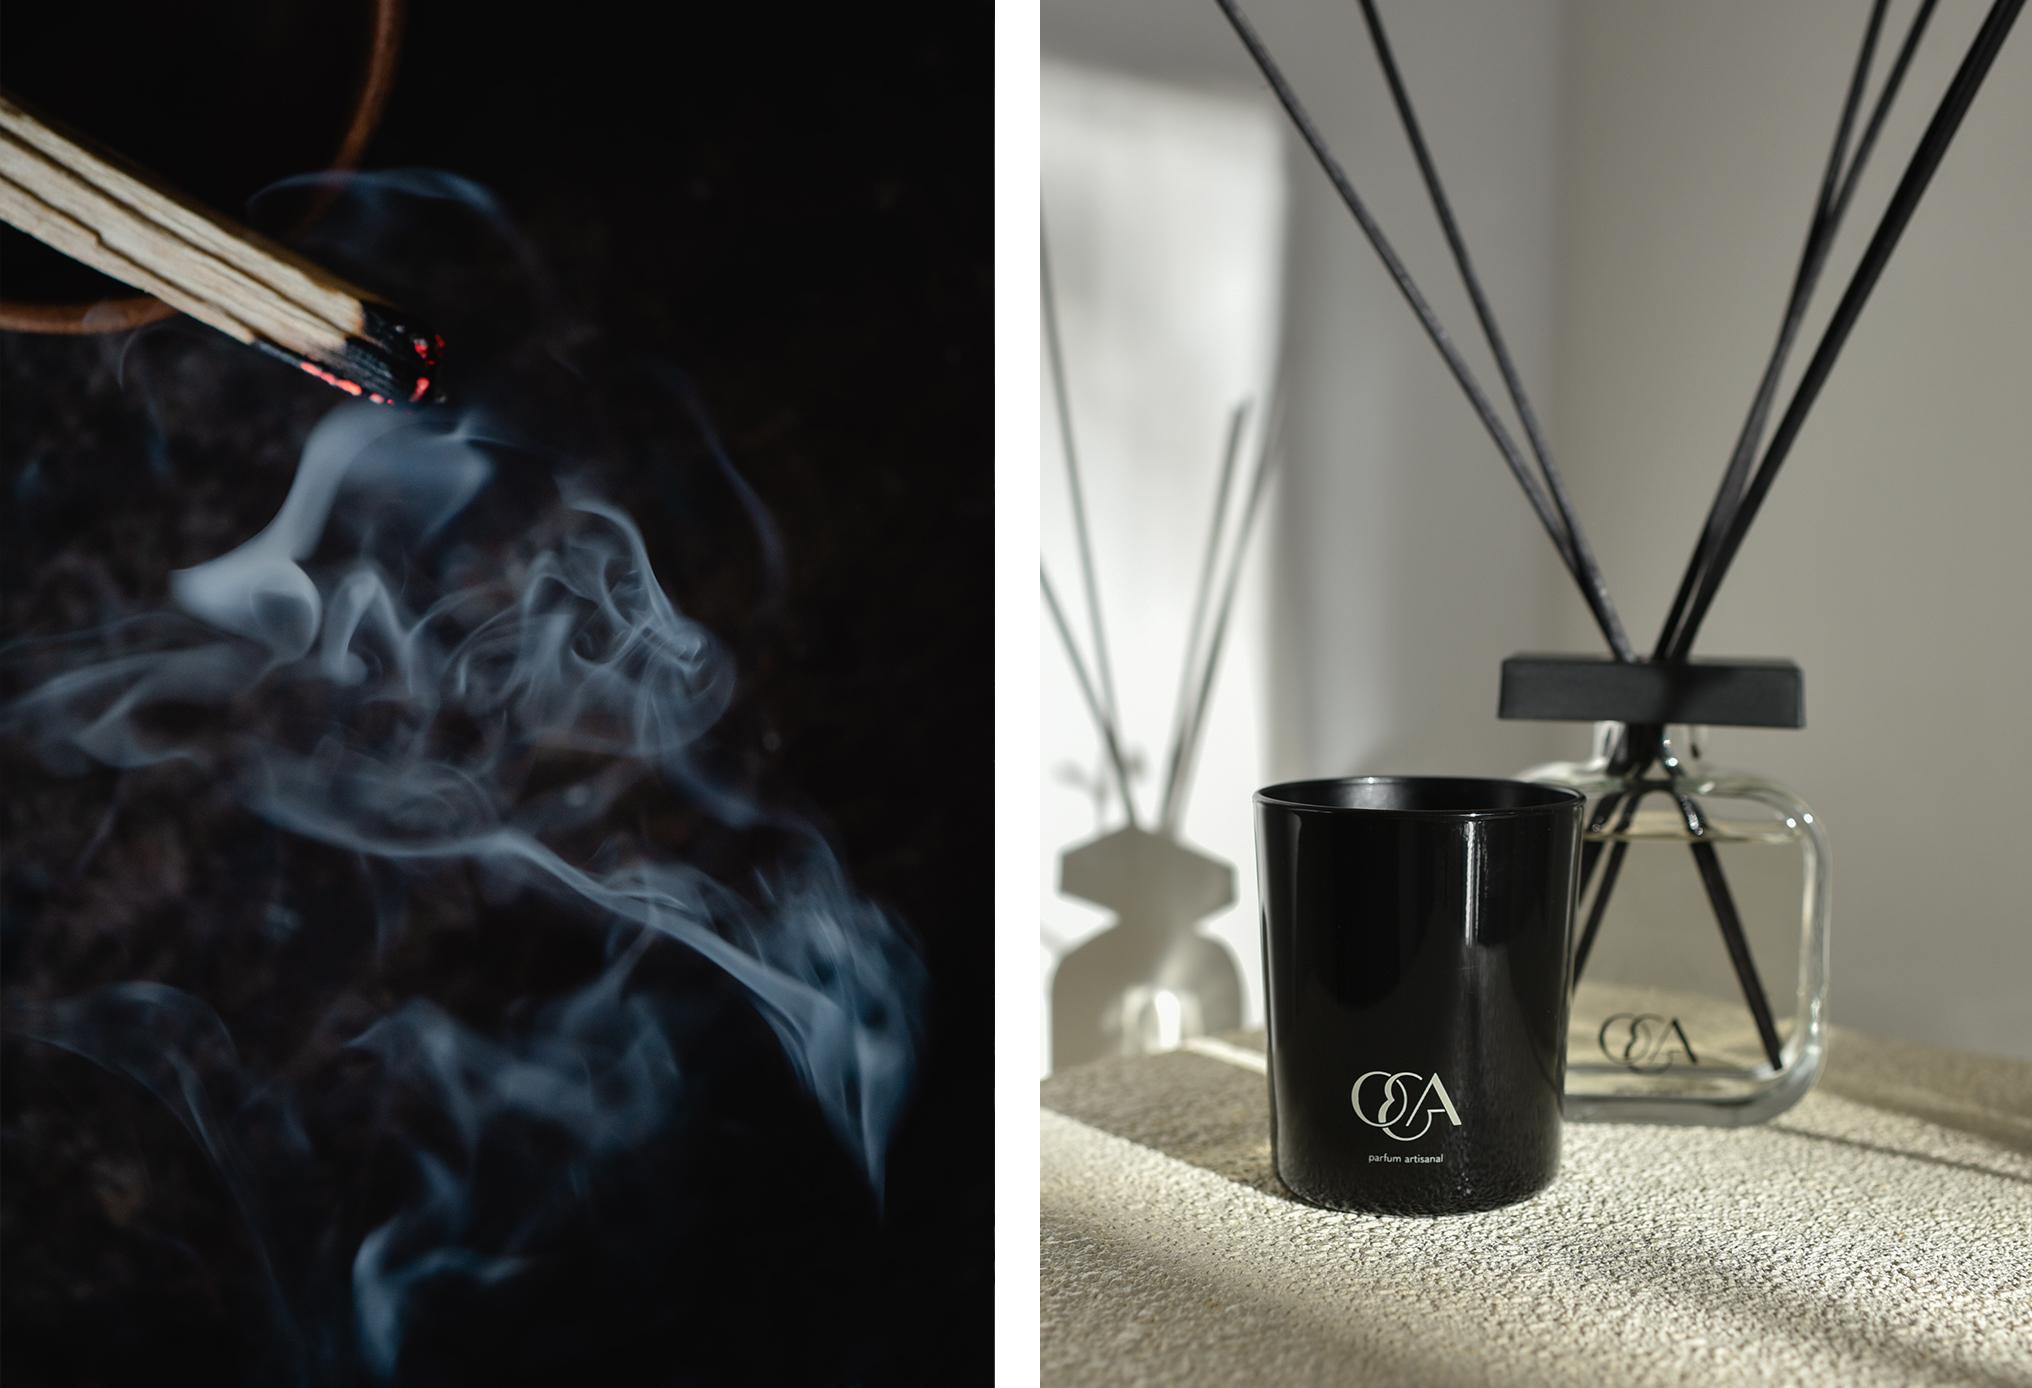 O&A London creates sophisticated scents for your home together with the best perfume houses in Grasse. Individually designed home diffusers will add an indelible impression of your home, literally in the air itself.

Top notes: cedar, birch,